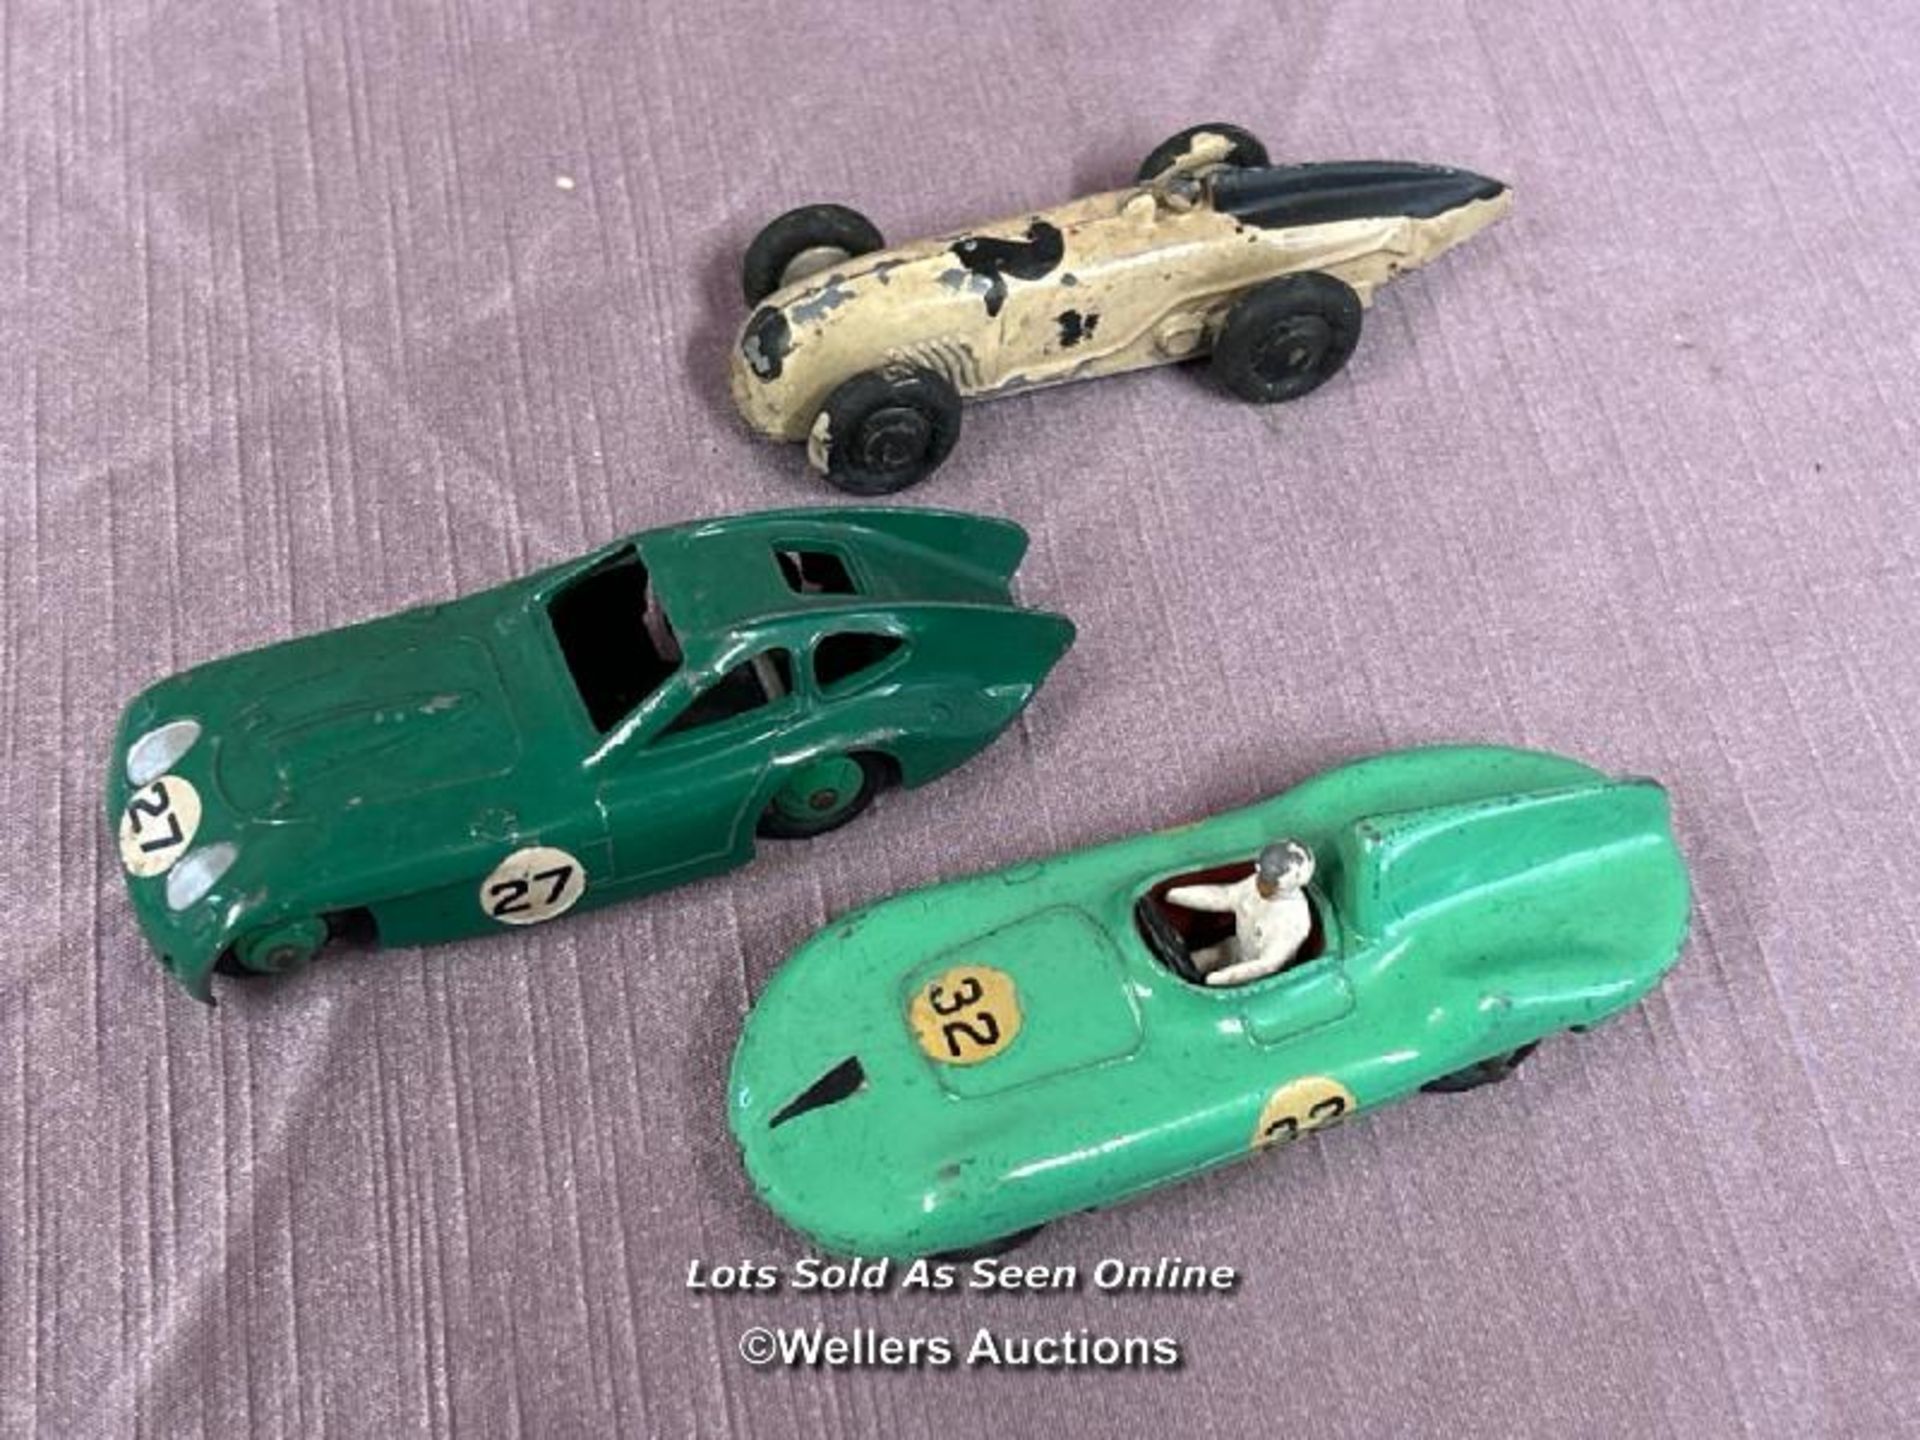 THREE DINKY DIE CAST RACING CARS INCLUDING CONNAUGHT NO. 236, BRISTOL 450 NO. 163 AND ONE OTHER